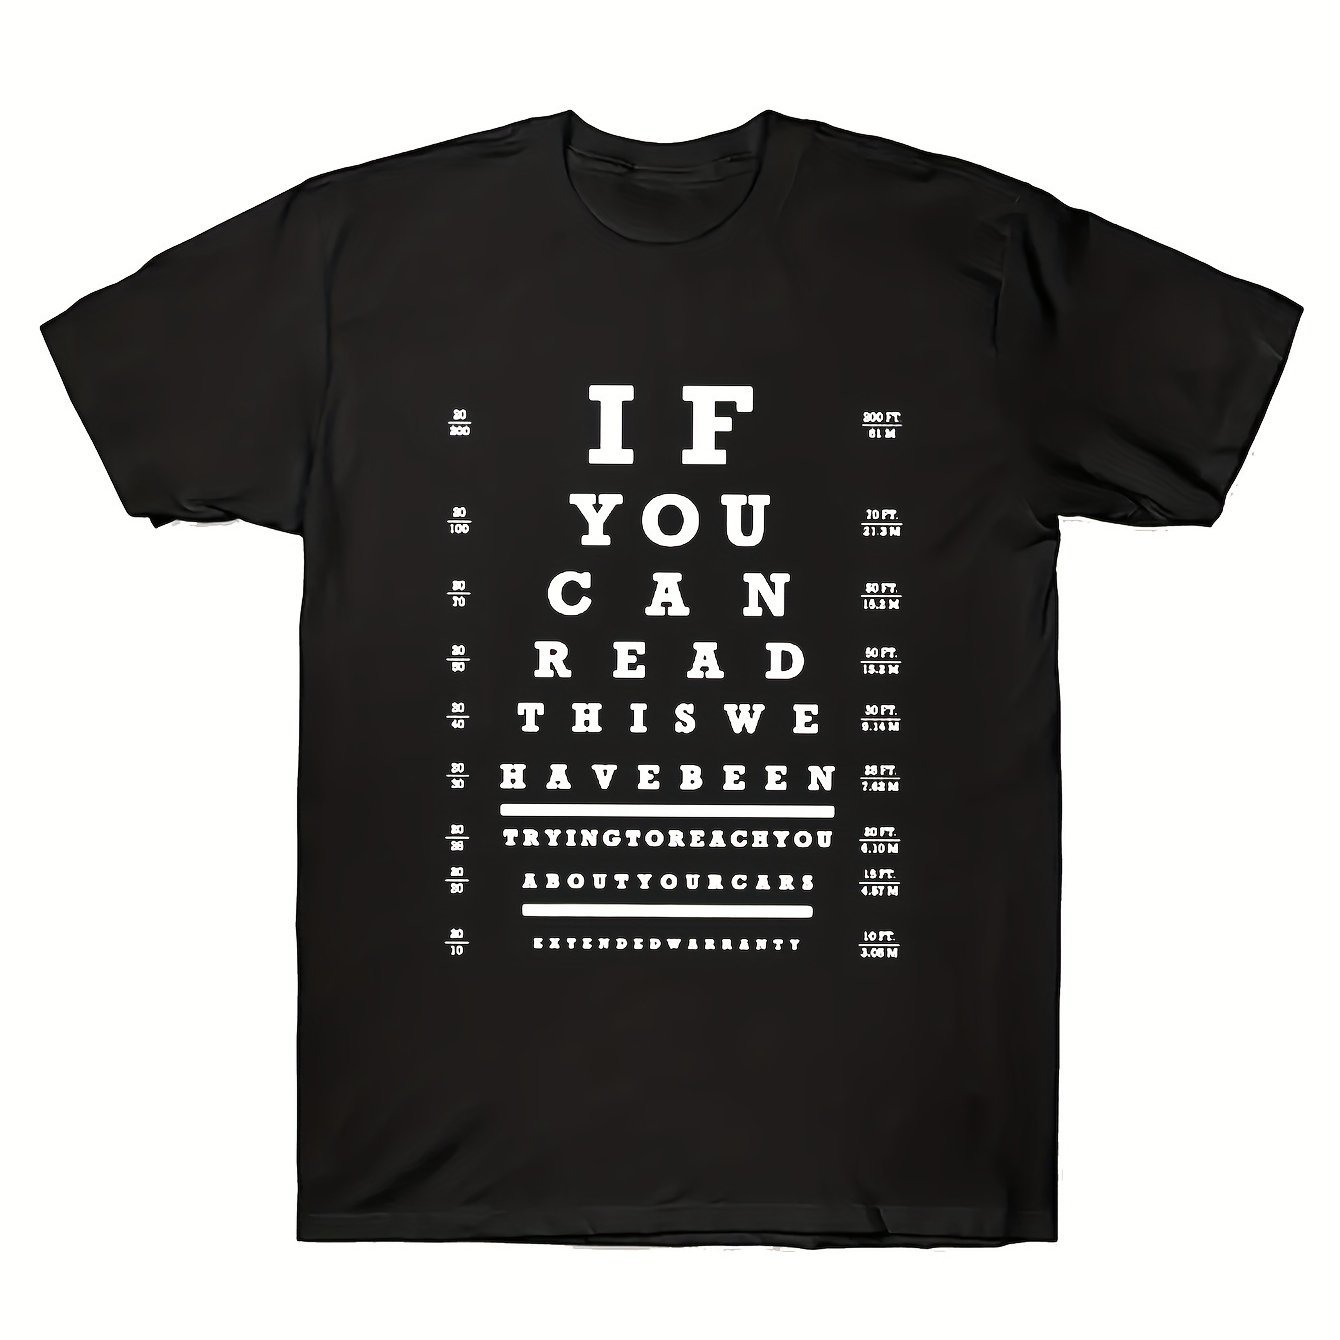 

1 Pc, 100% Cotton T-shirt, Men's Graphic Print T-shirt 100% Cotton Funny Tee Summer Casual Tee Top- Eye Chart- If You Can Read This We Have Been Trying To Reach You About Your Cars